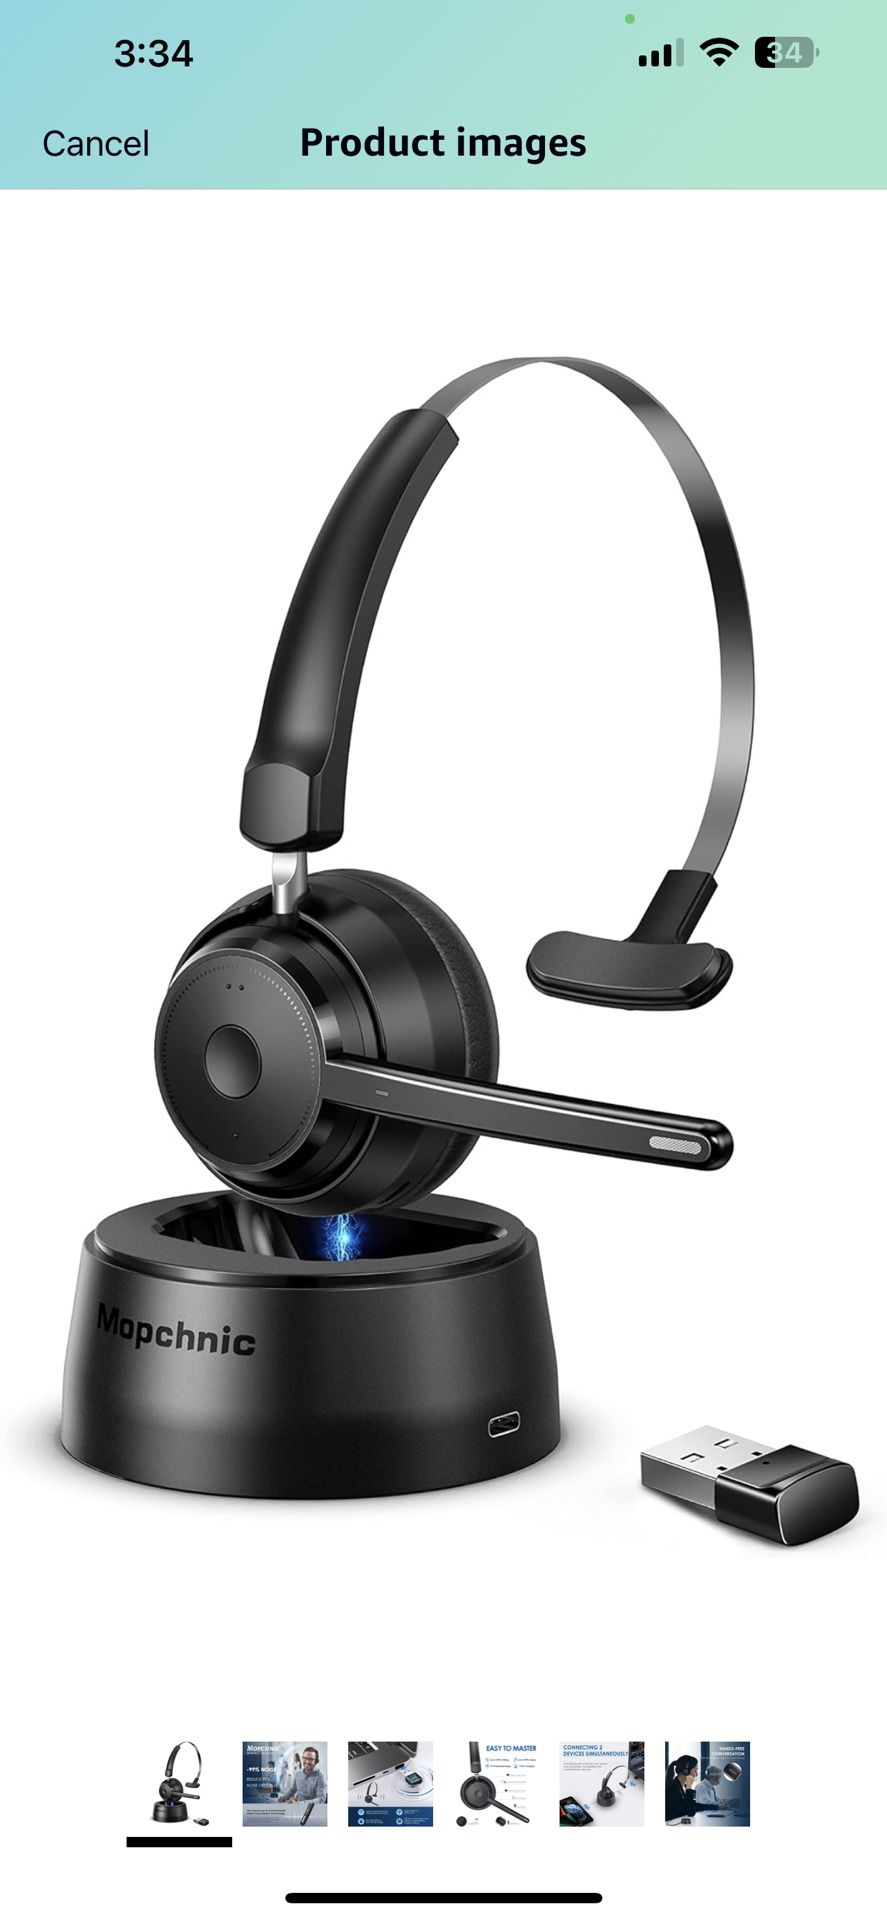 Bluetooth Headset, Wireless Headset with Upgraded Microphone AI Noise Canceling, On Ear Bluetooth Headset with USB Dongle for Office Call Center Skype